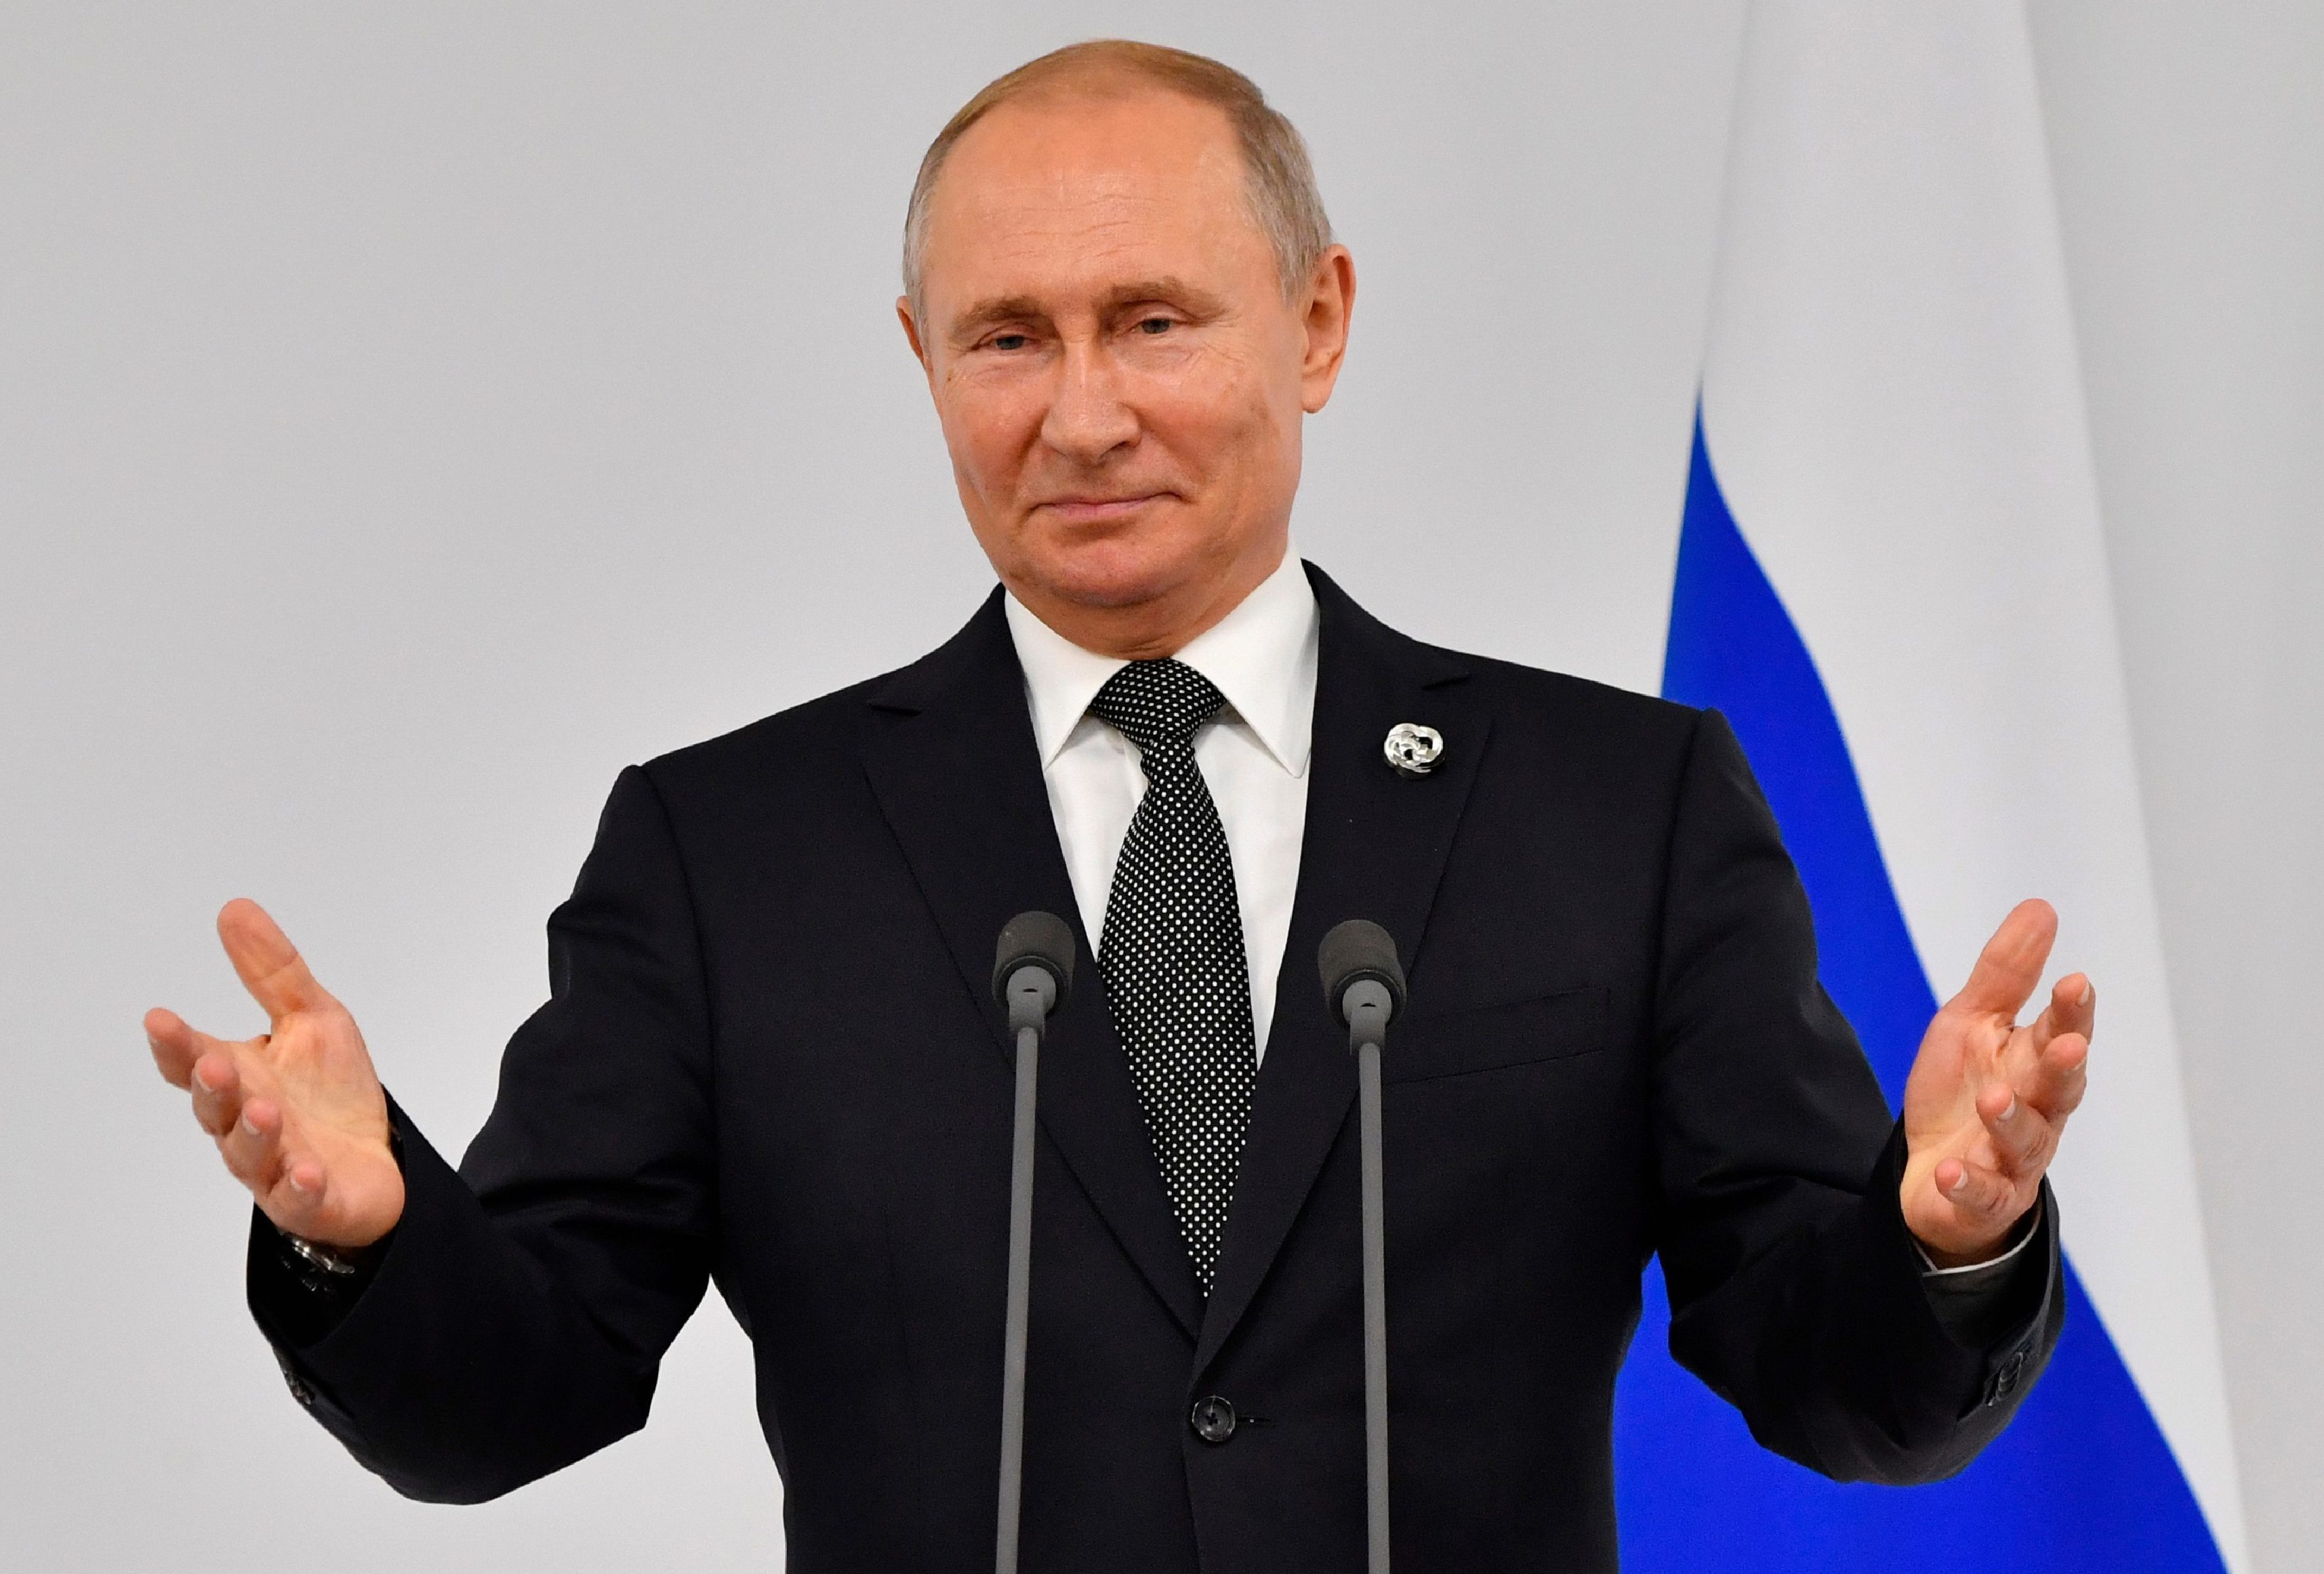 Putin steps up Russia’s push for influence in Africa